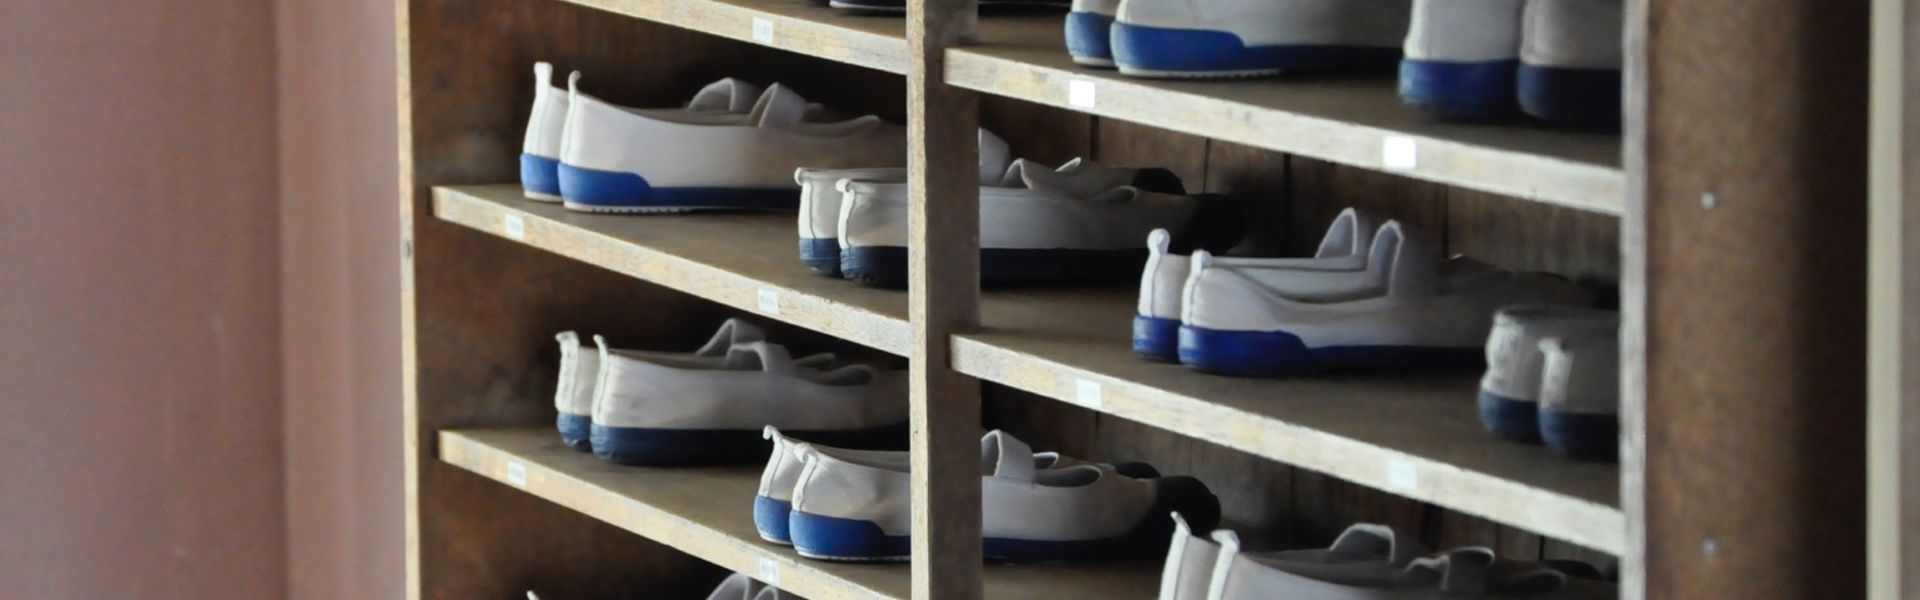 Self-service rack with available pairs of bowling shoes